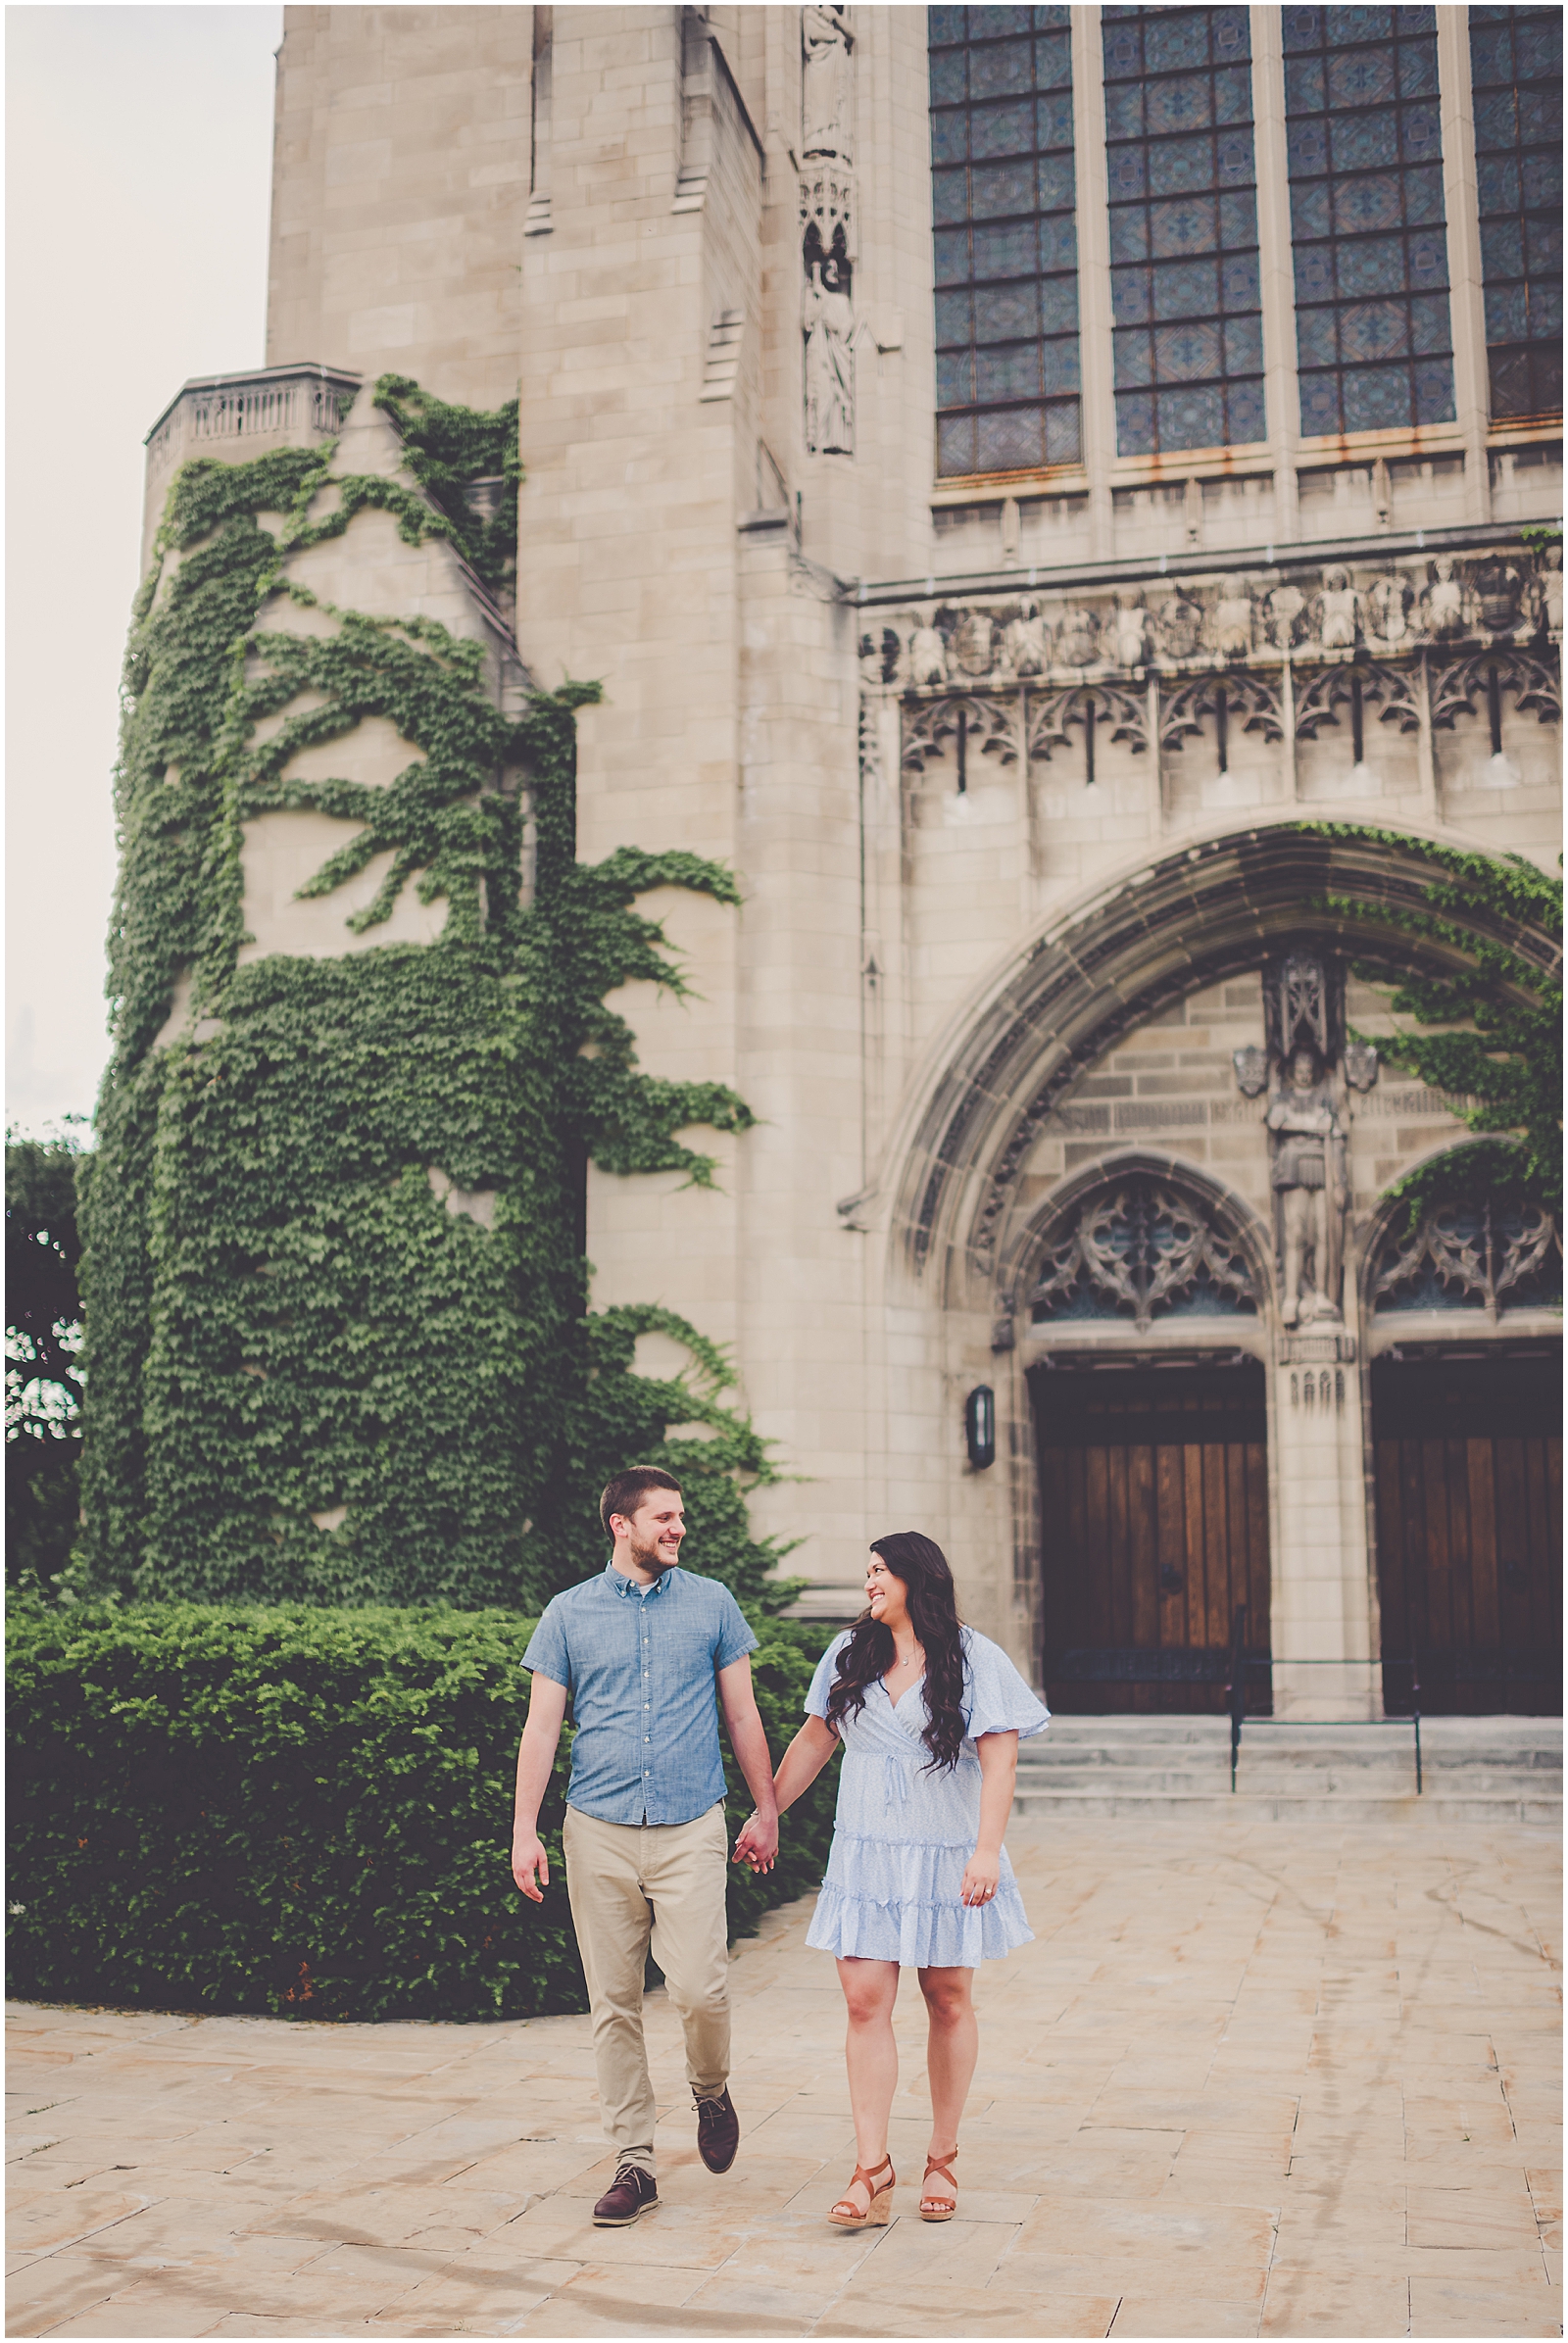 Jenny and Colin's summer University of Chicago engagement photos with Chicagoland wedding photographer Kara Evans Photographer.